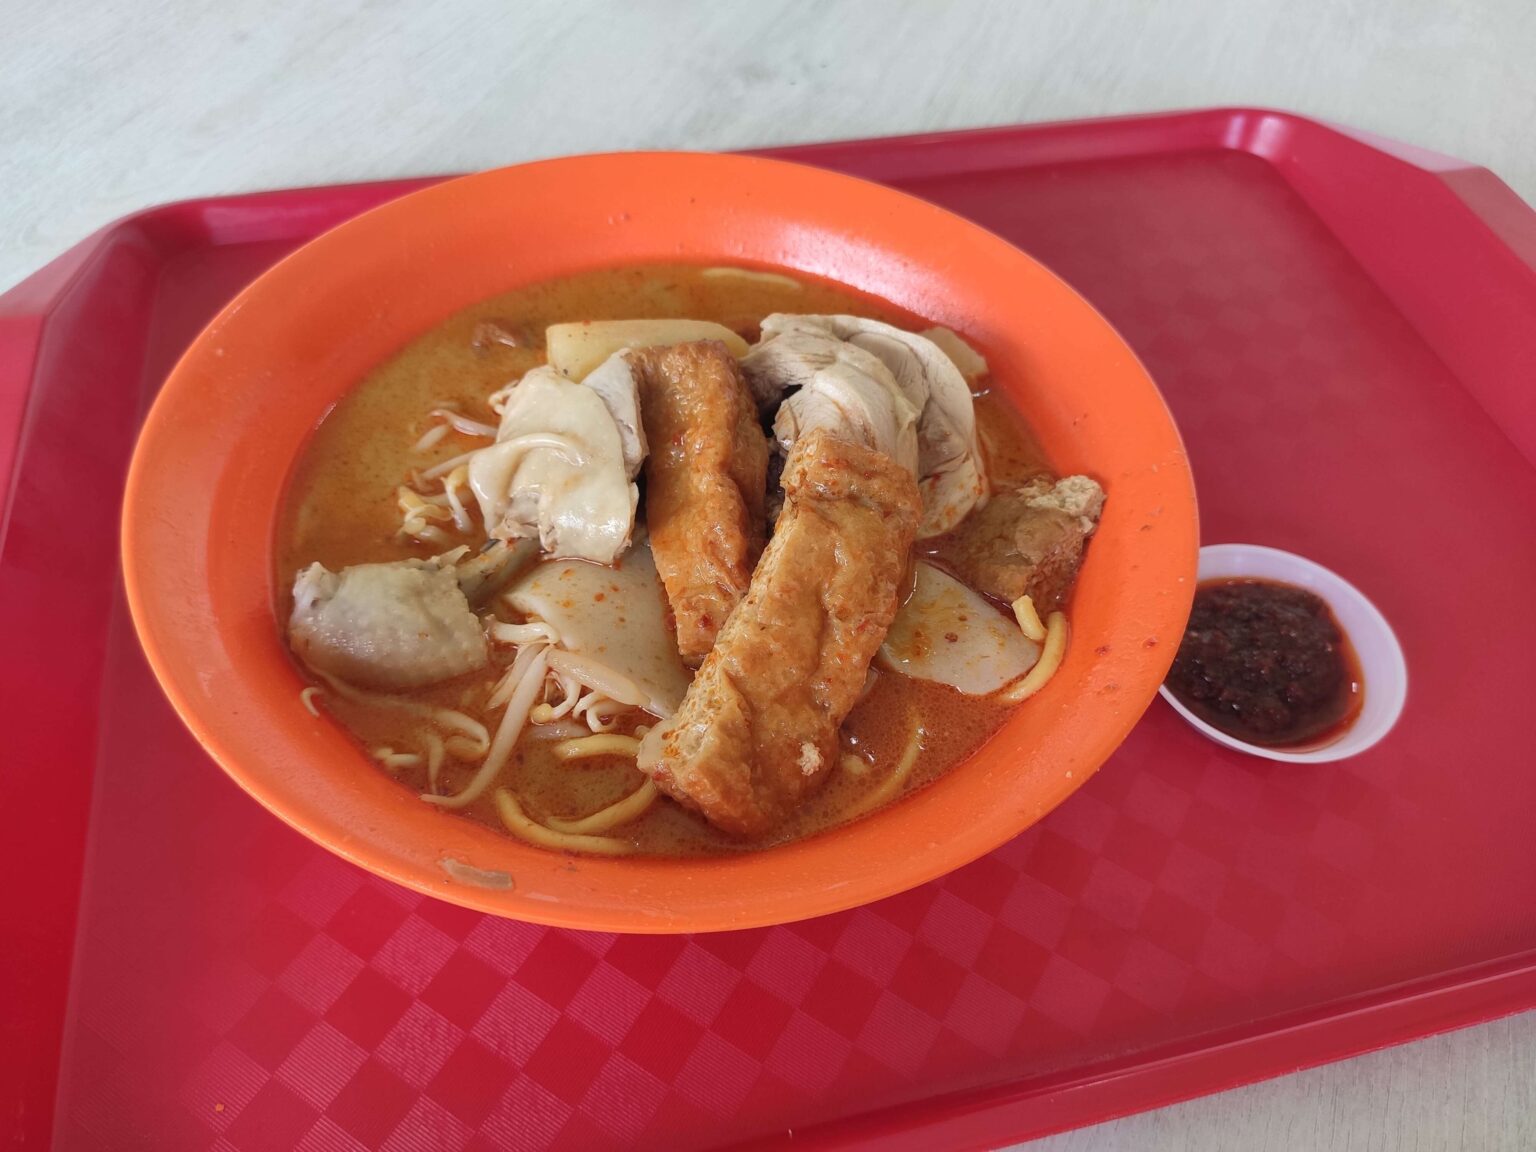 Sheng Kee Curry Chicken Noodle: Curry Chicken Noodles with Chilli